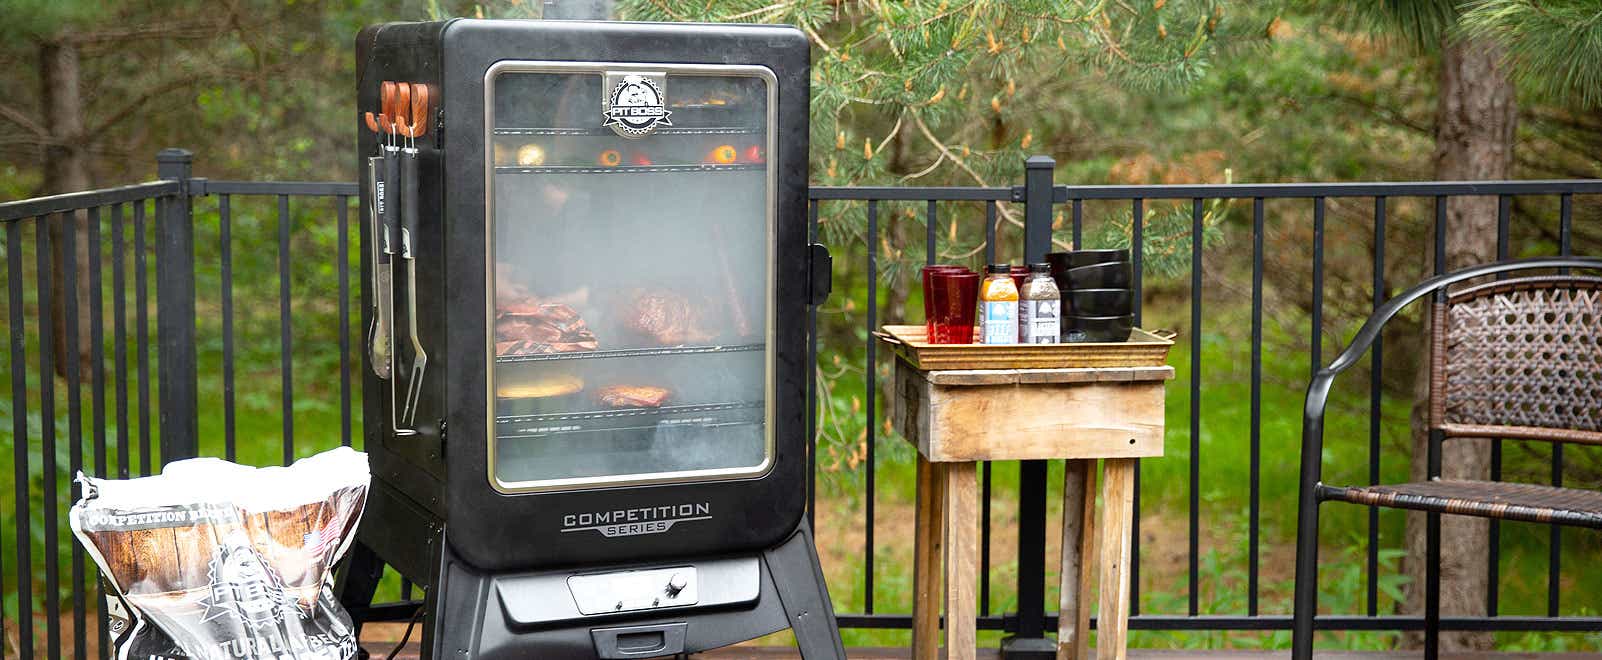 Pit Boss Vertical 5 Series Competition Series Pellet Smoker on display